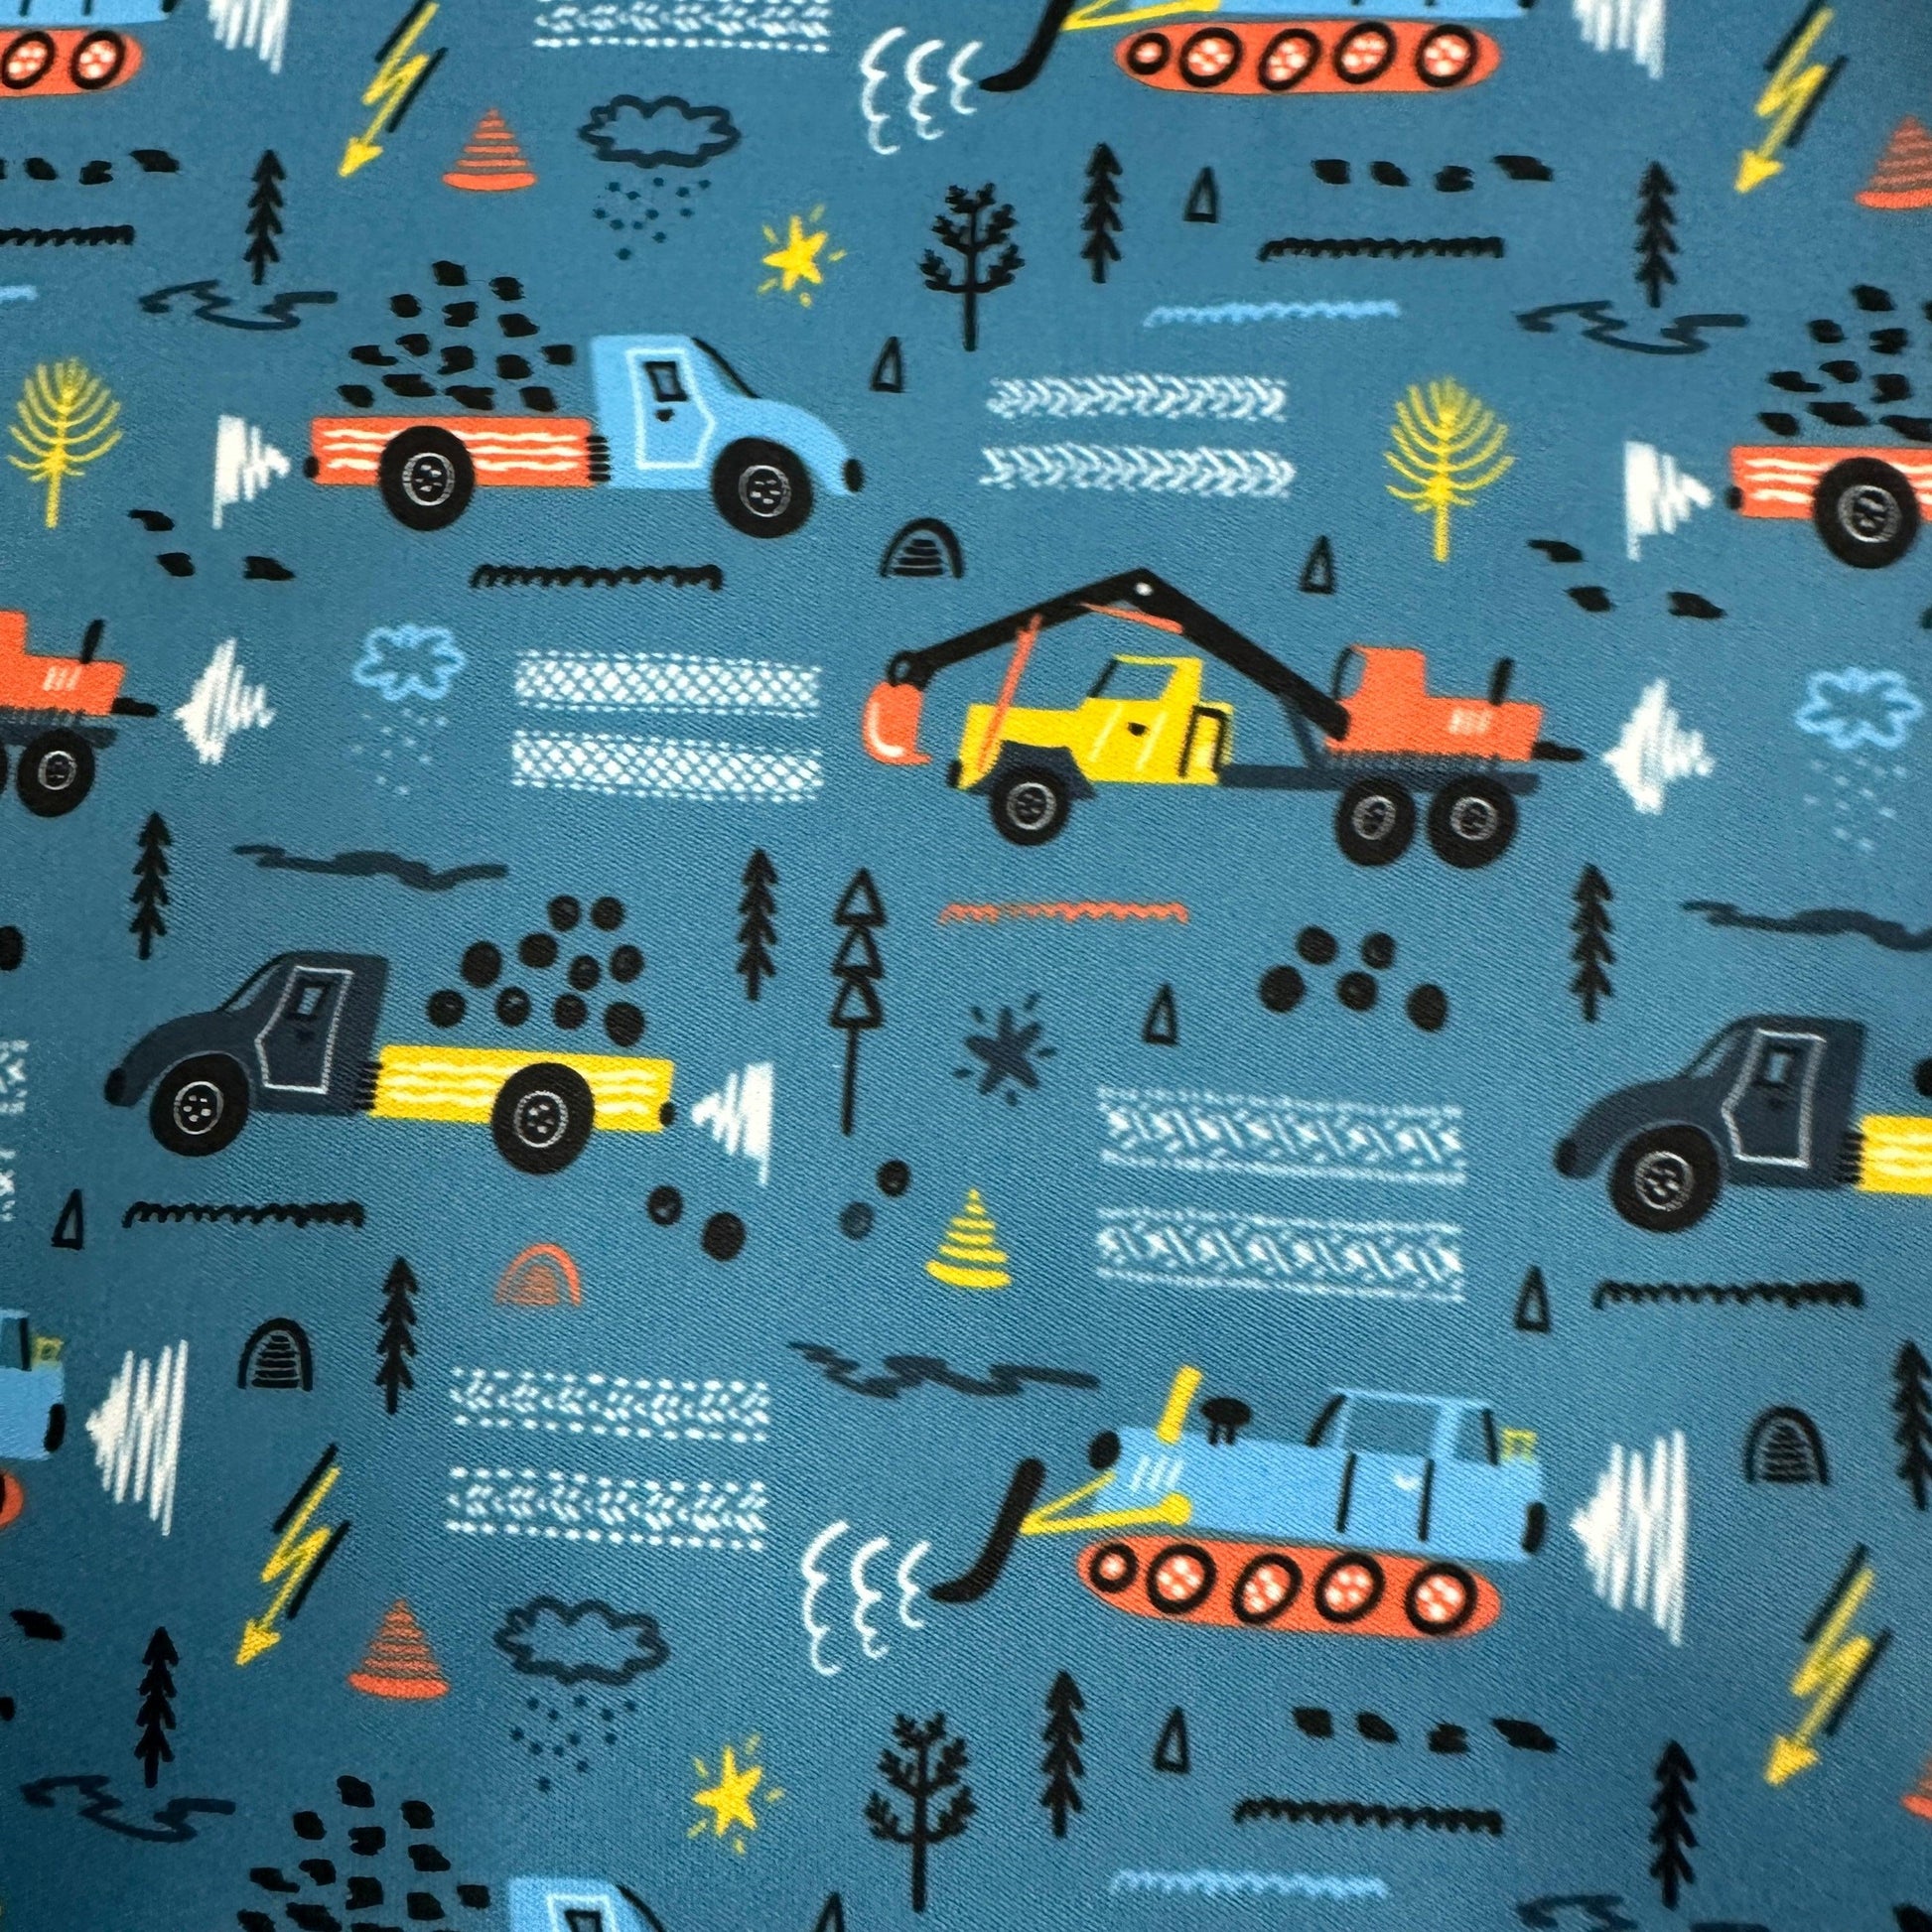 Trucks and Bulldozers on 1 mil PUL Fabric - Made in the USA - Nature's Fabrics